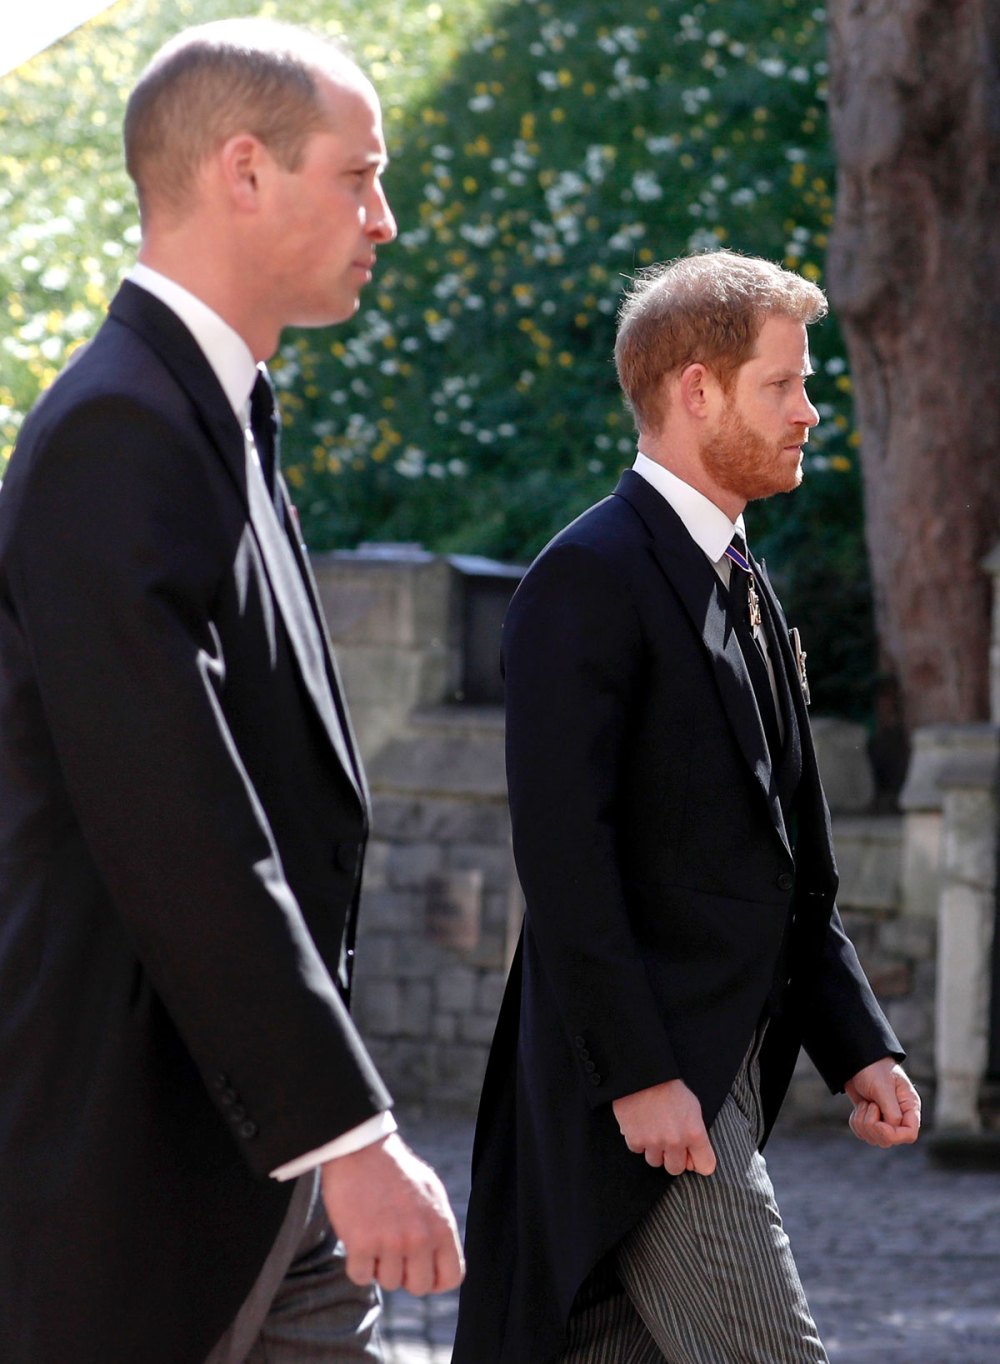 Prince Harry Queen Elizabeth II Spoke At Least 2 Occasions During Family Reunion